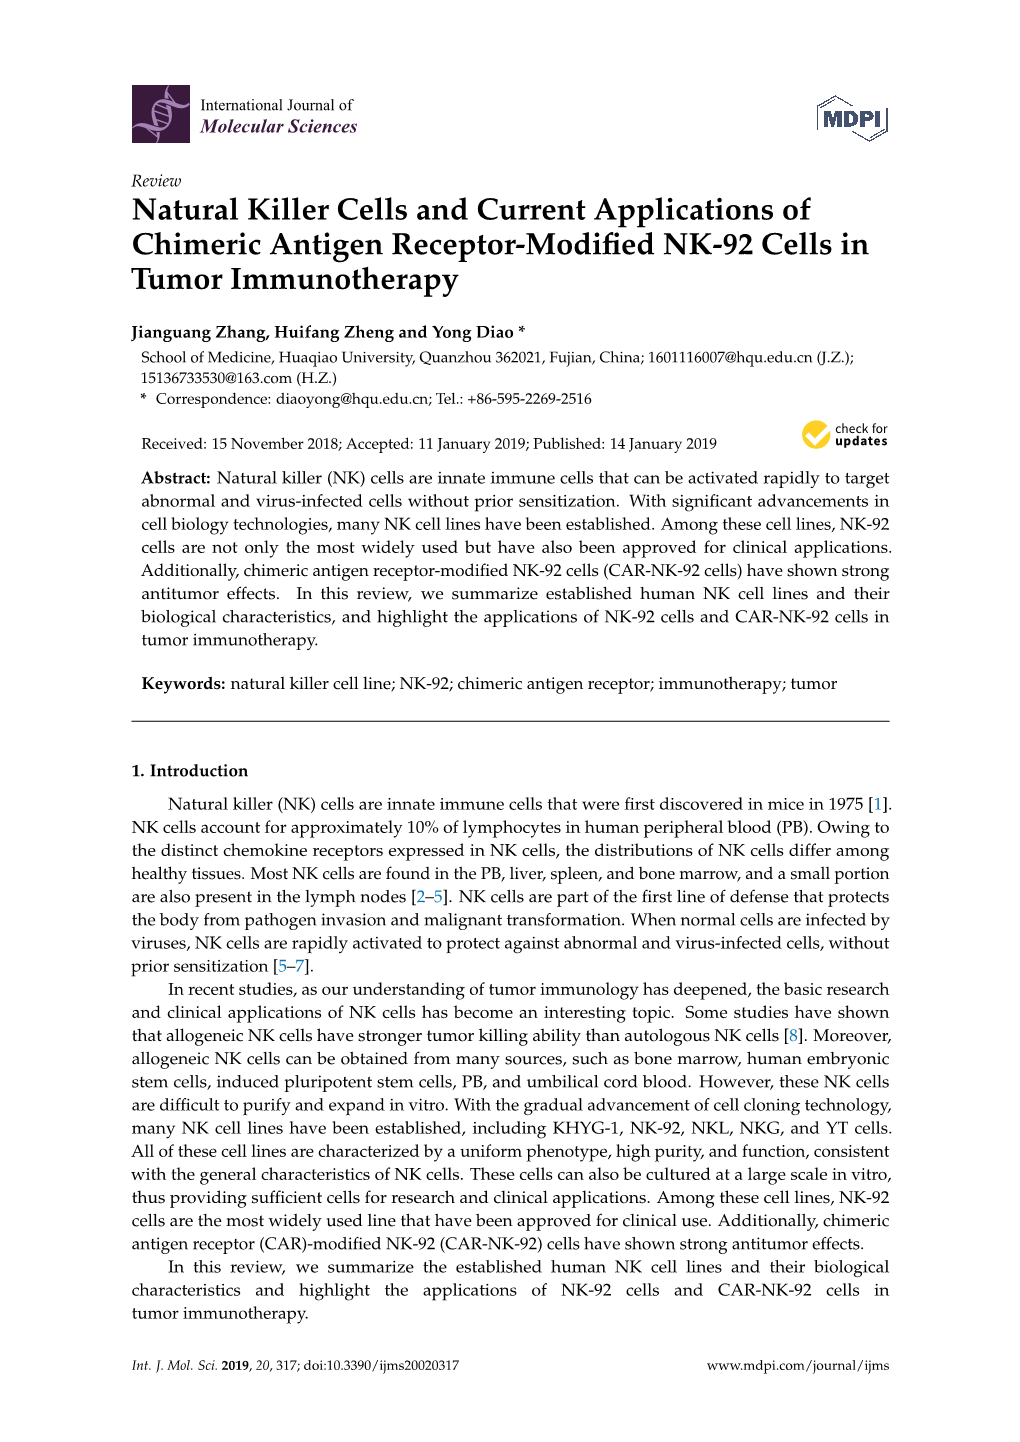 Natural Killer Cells and Current Applications of Chimeric Antigen Receptor-Modified NK-92 Cells in Tumor Immunotherapy